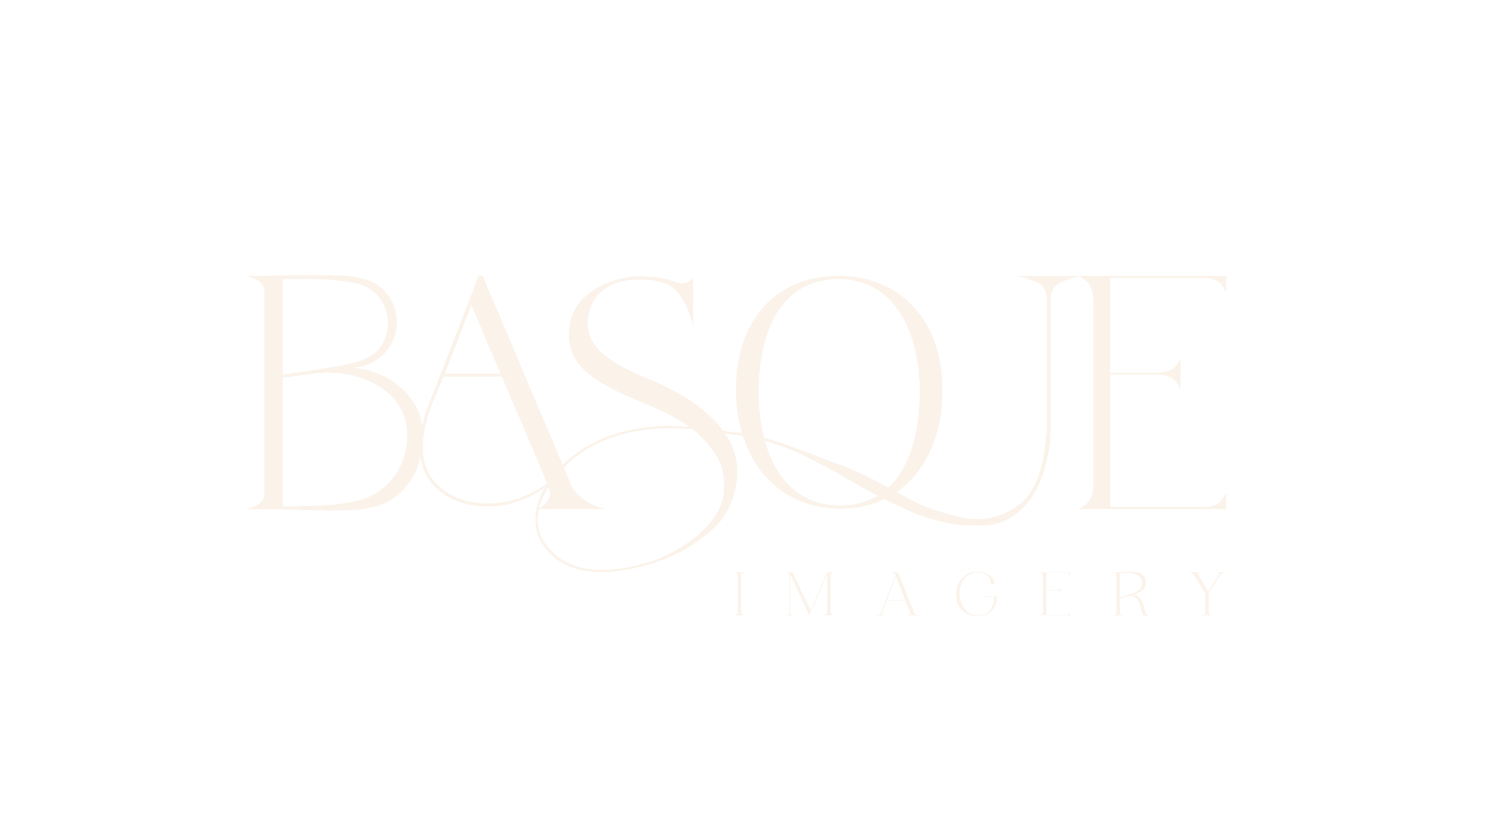 Basque Imagery